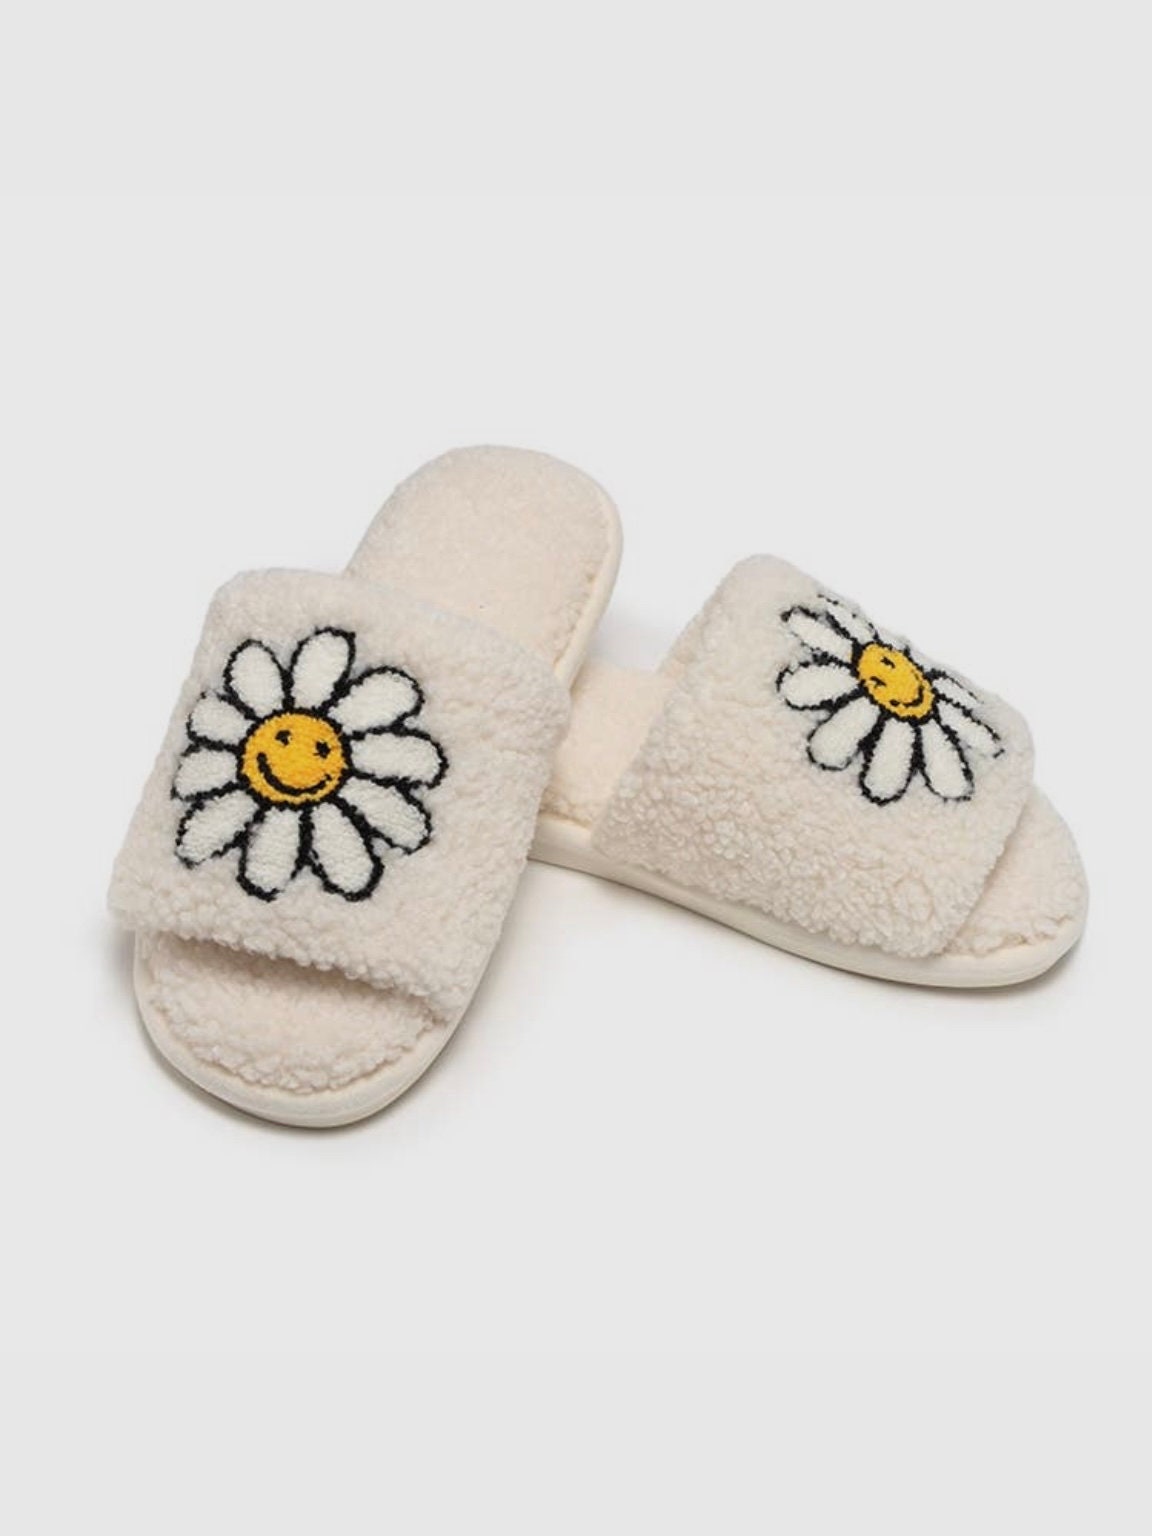  Slippers Daisy Marble Casual House Shoes Plush Lining